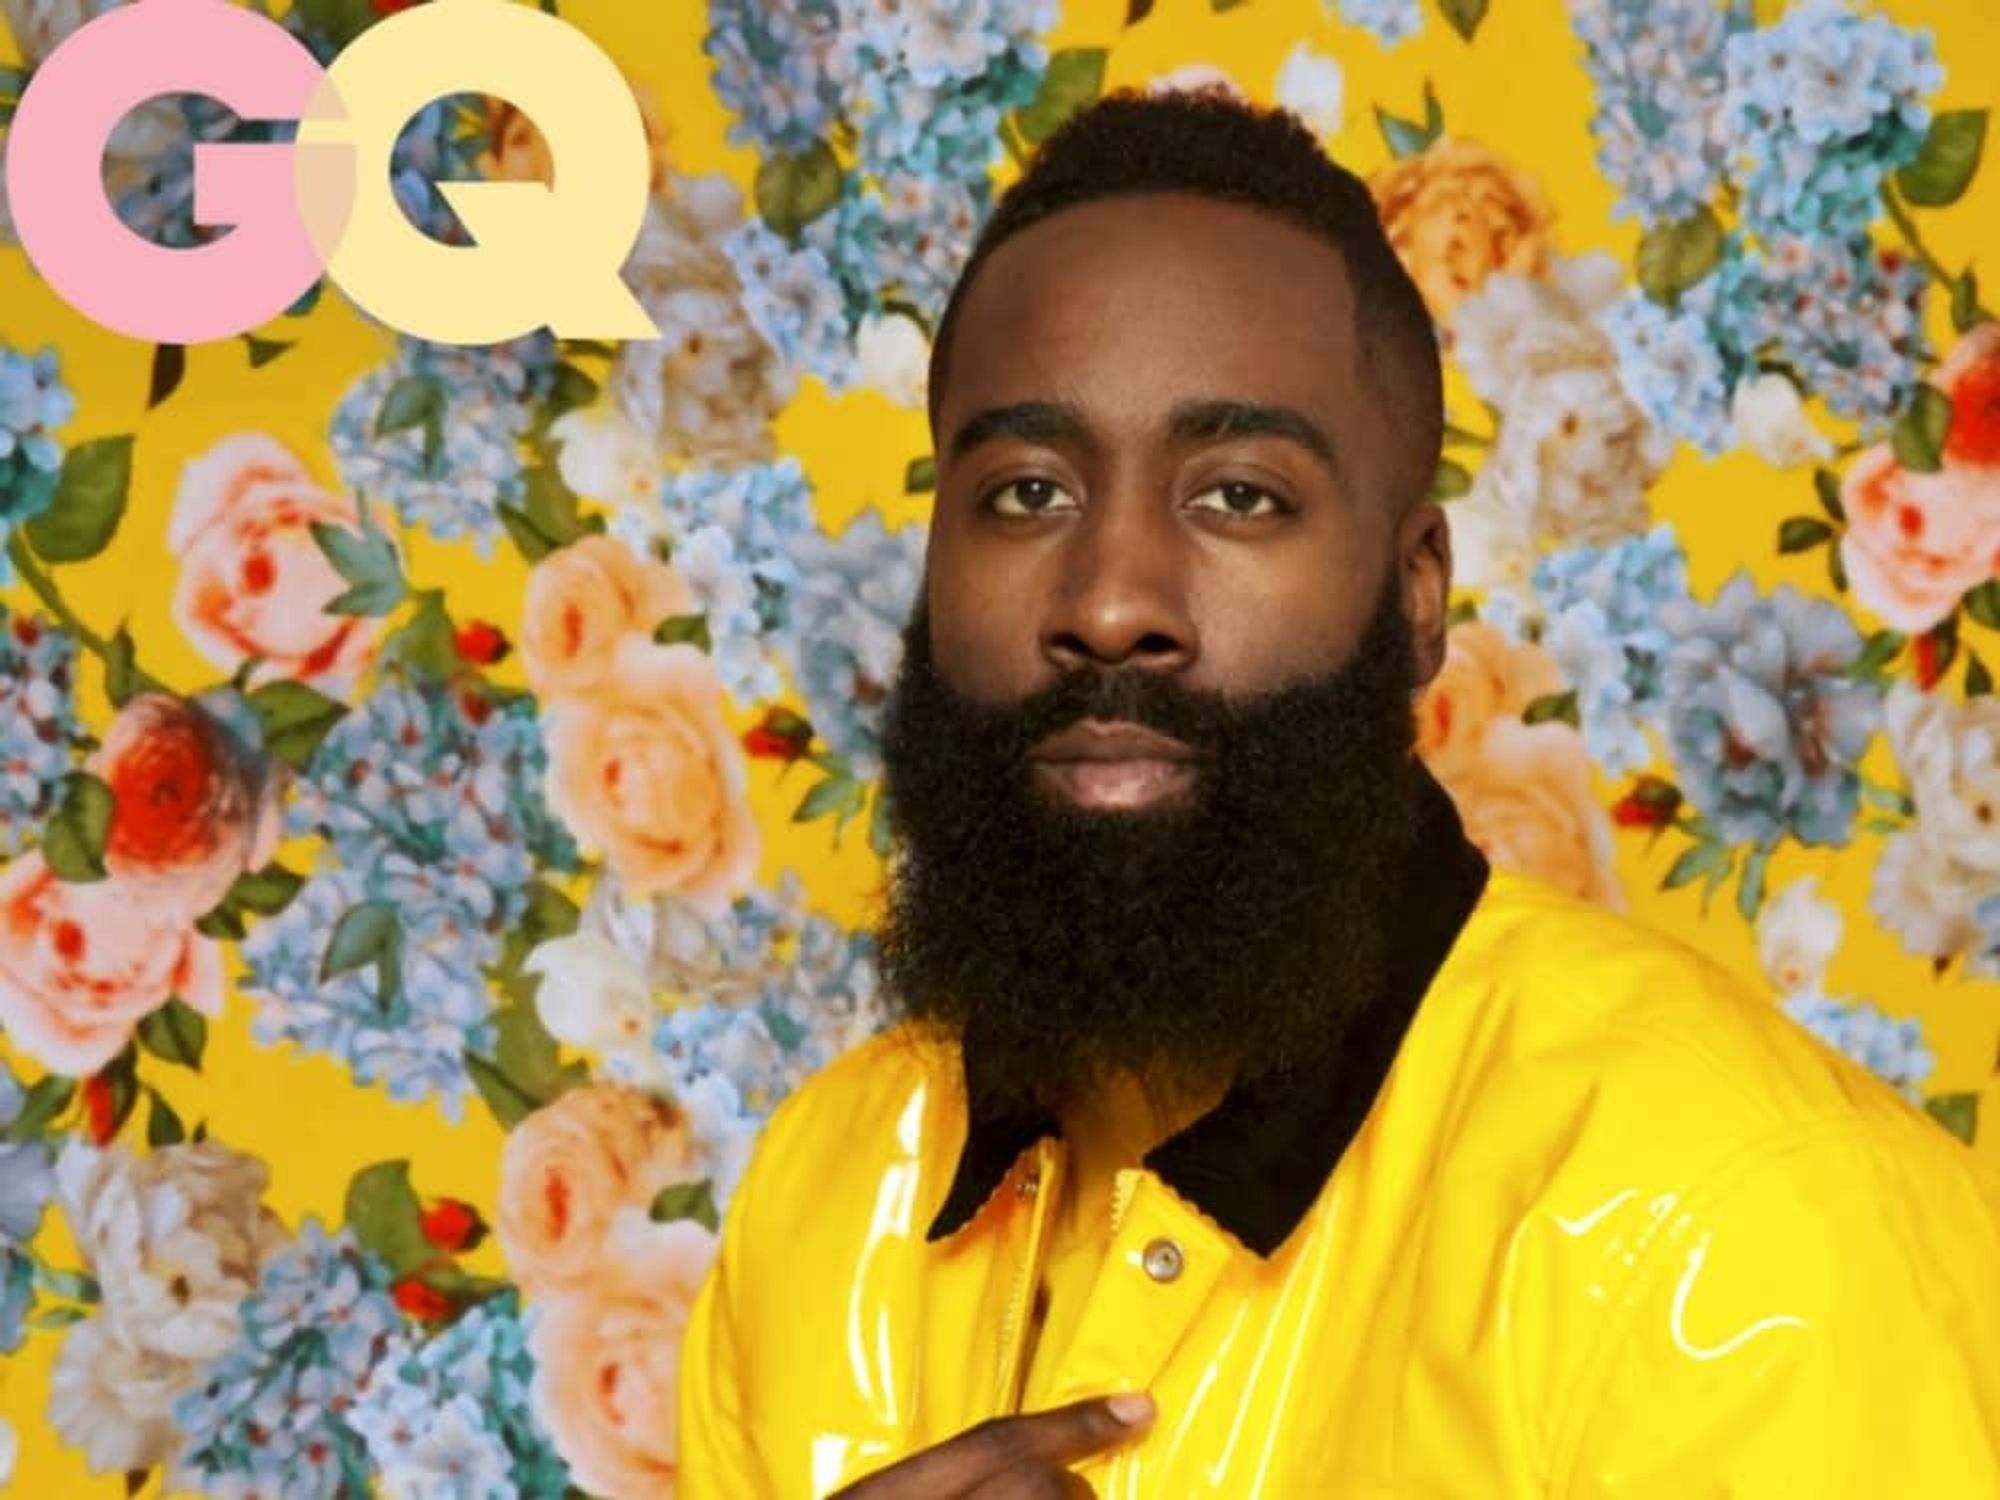 James Harden GQ flower cover Twitter May 2018 cover fashion